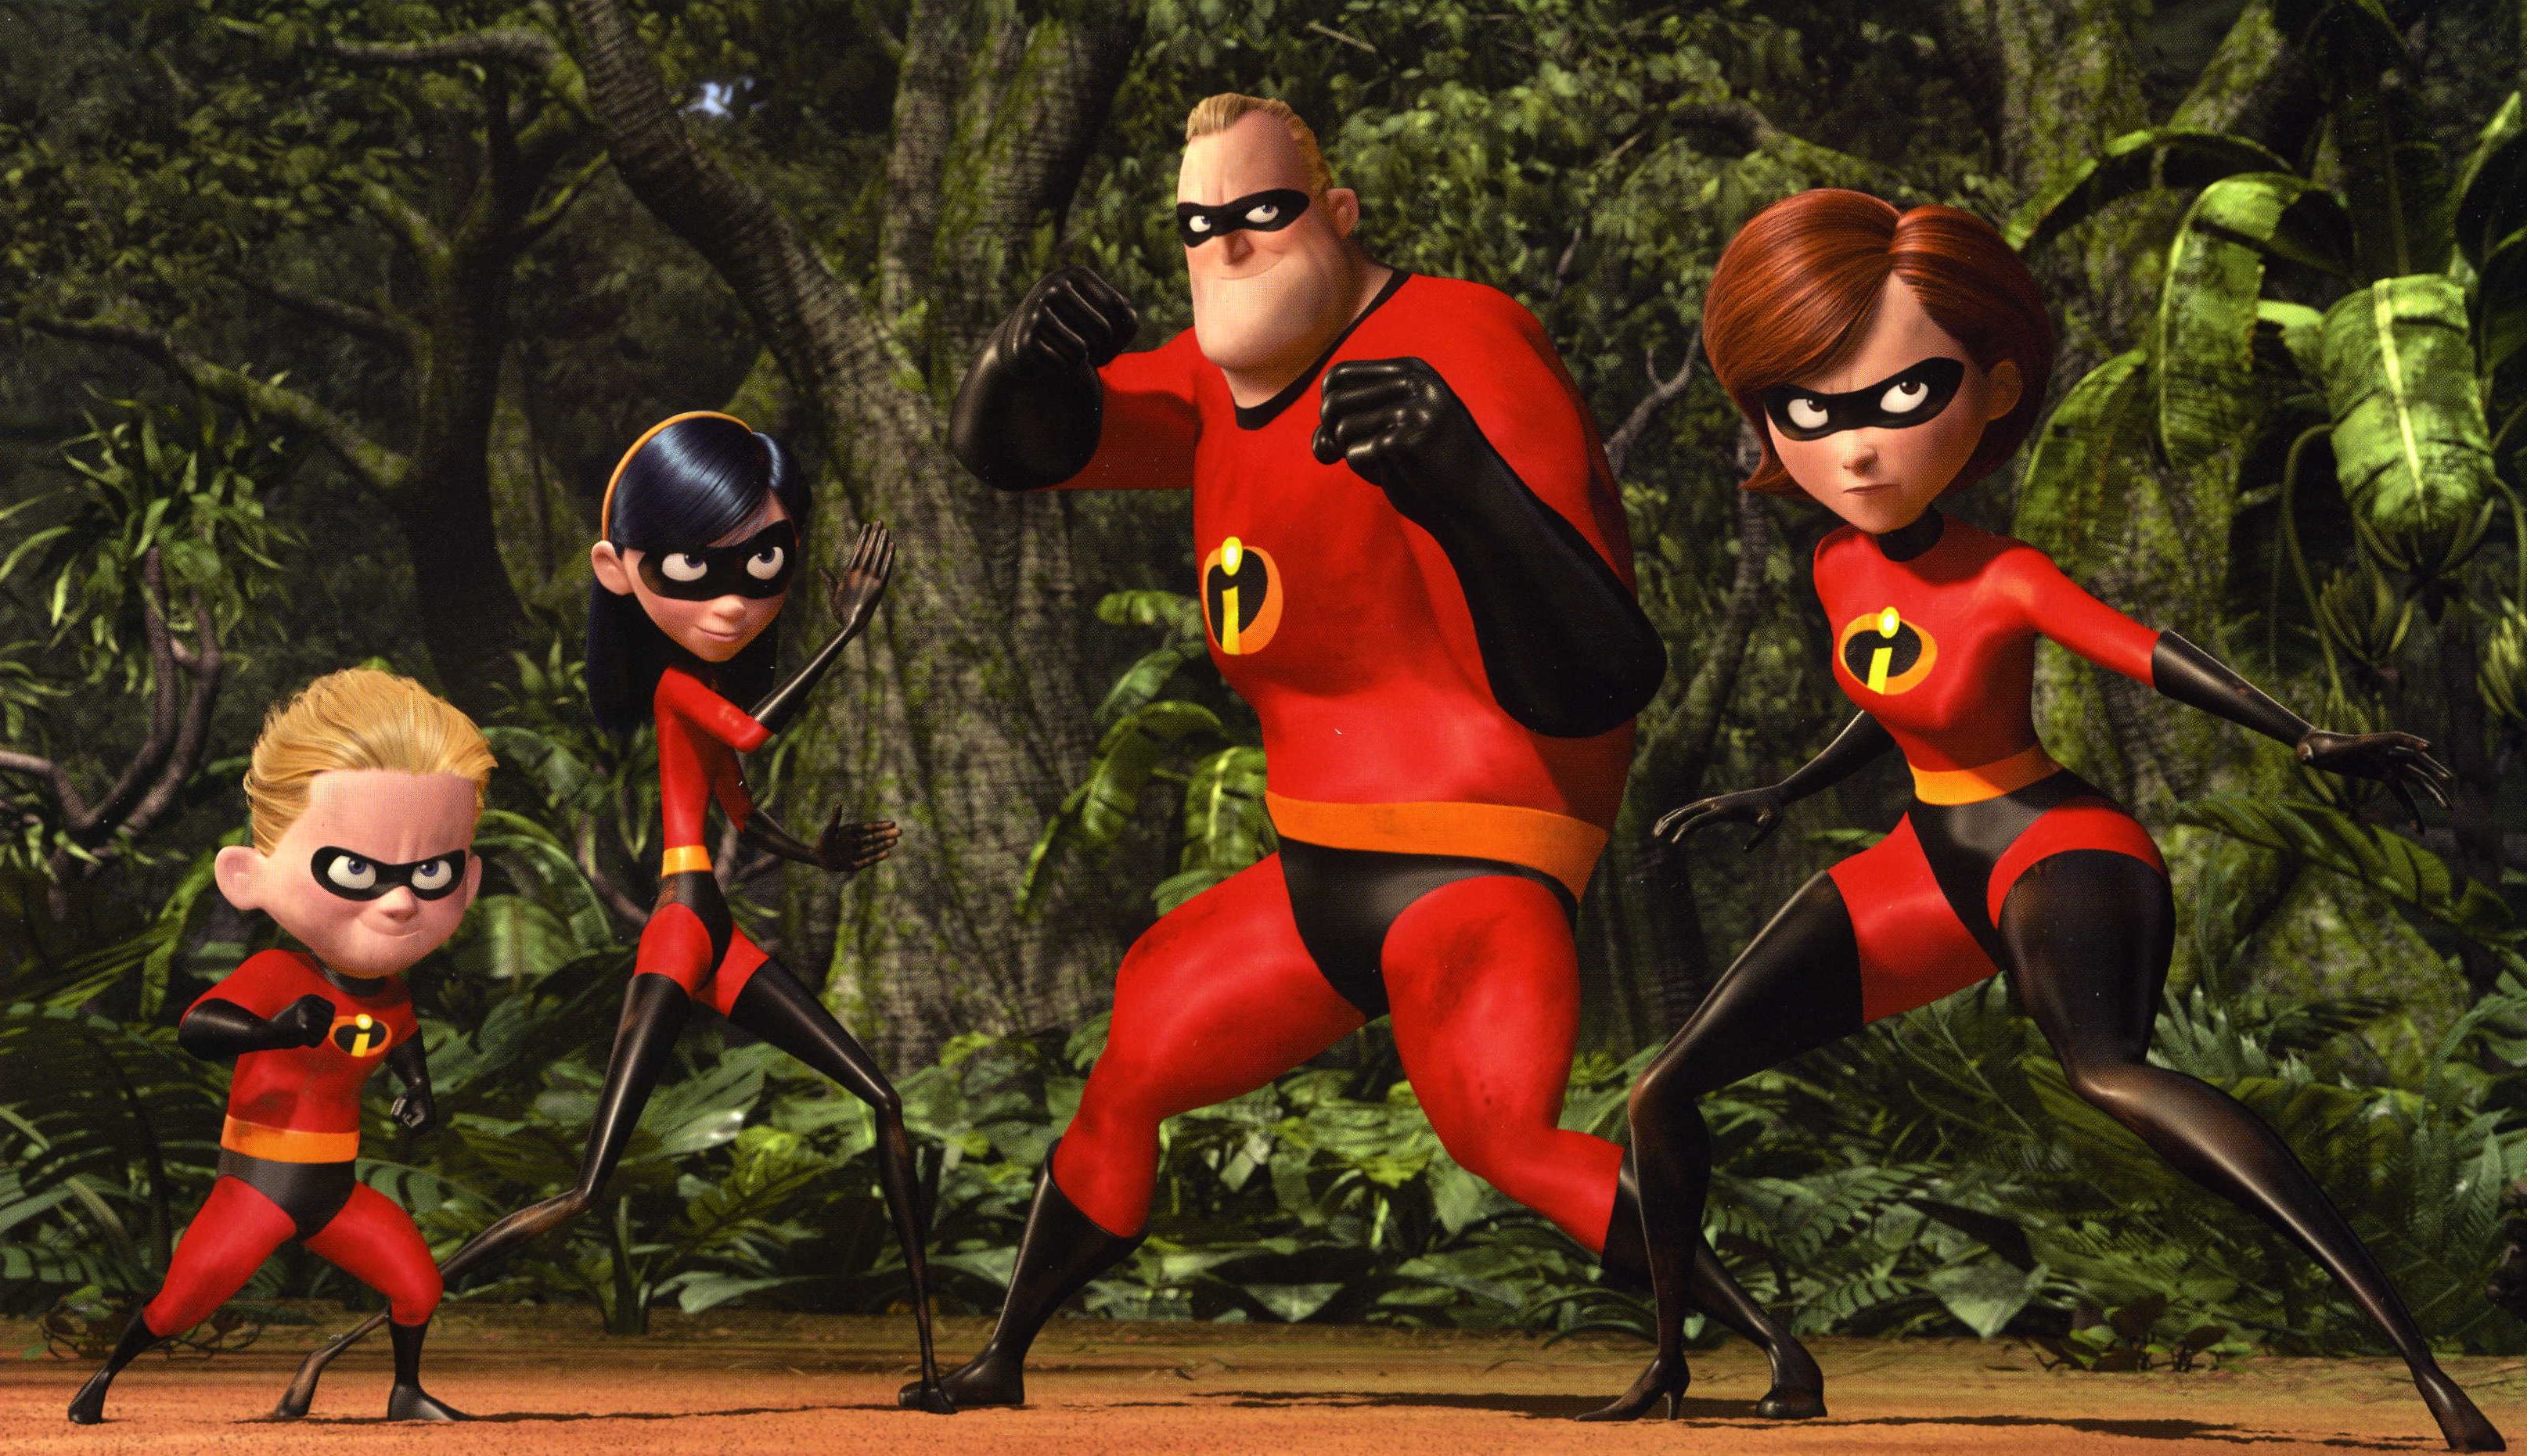 The Incredibles team